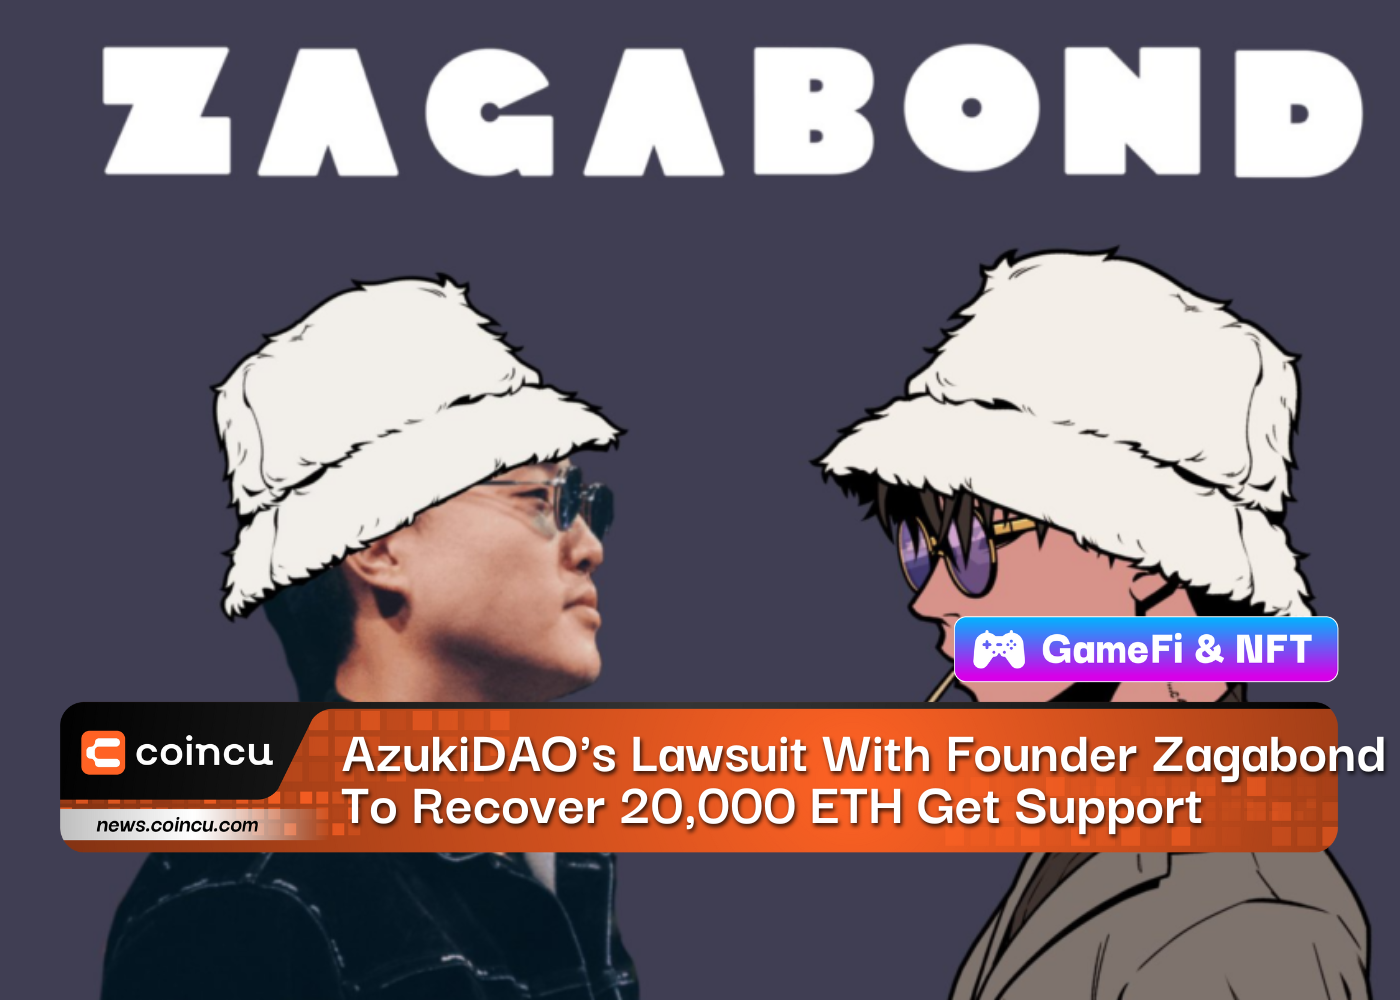 AzukiDAO's Lawsuit With Founder Zagabond To Recover 20,000 ETH Get Support